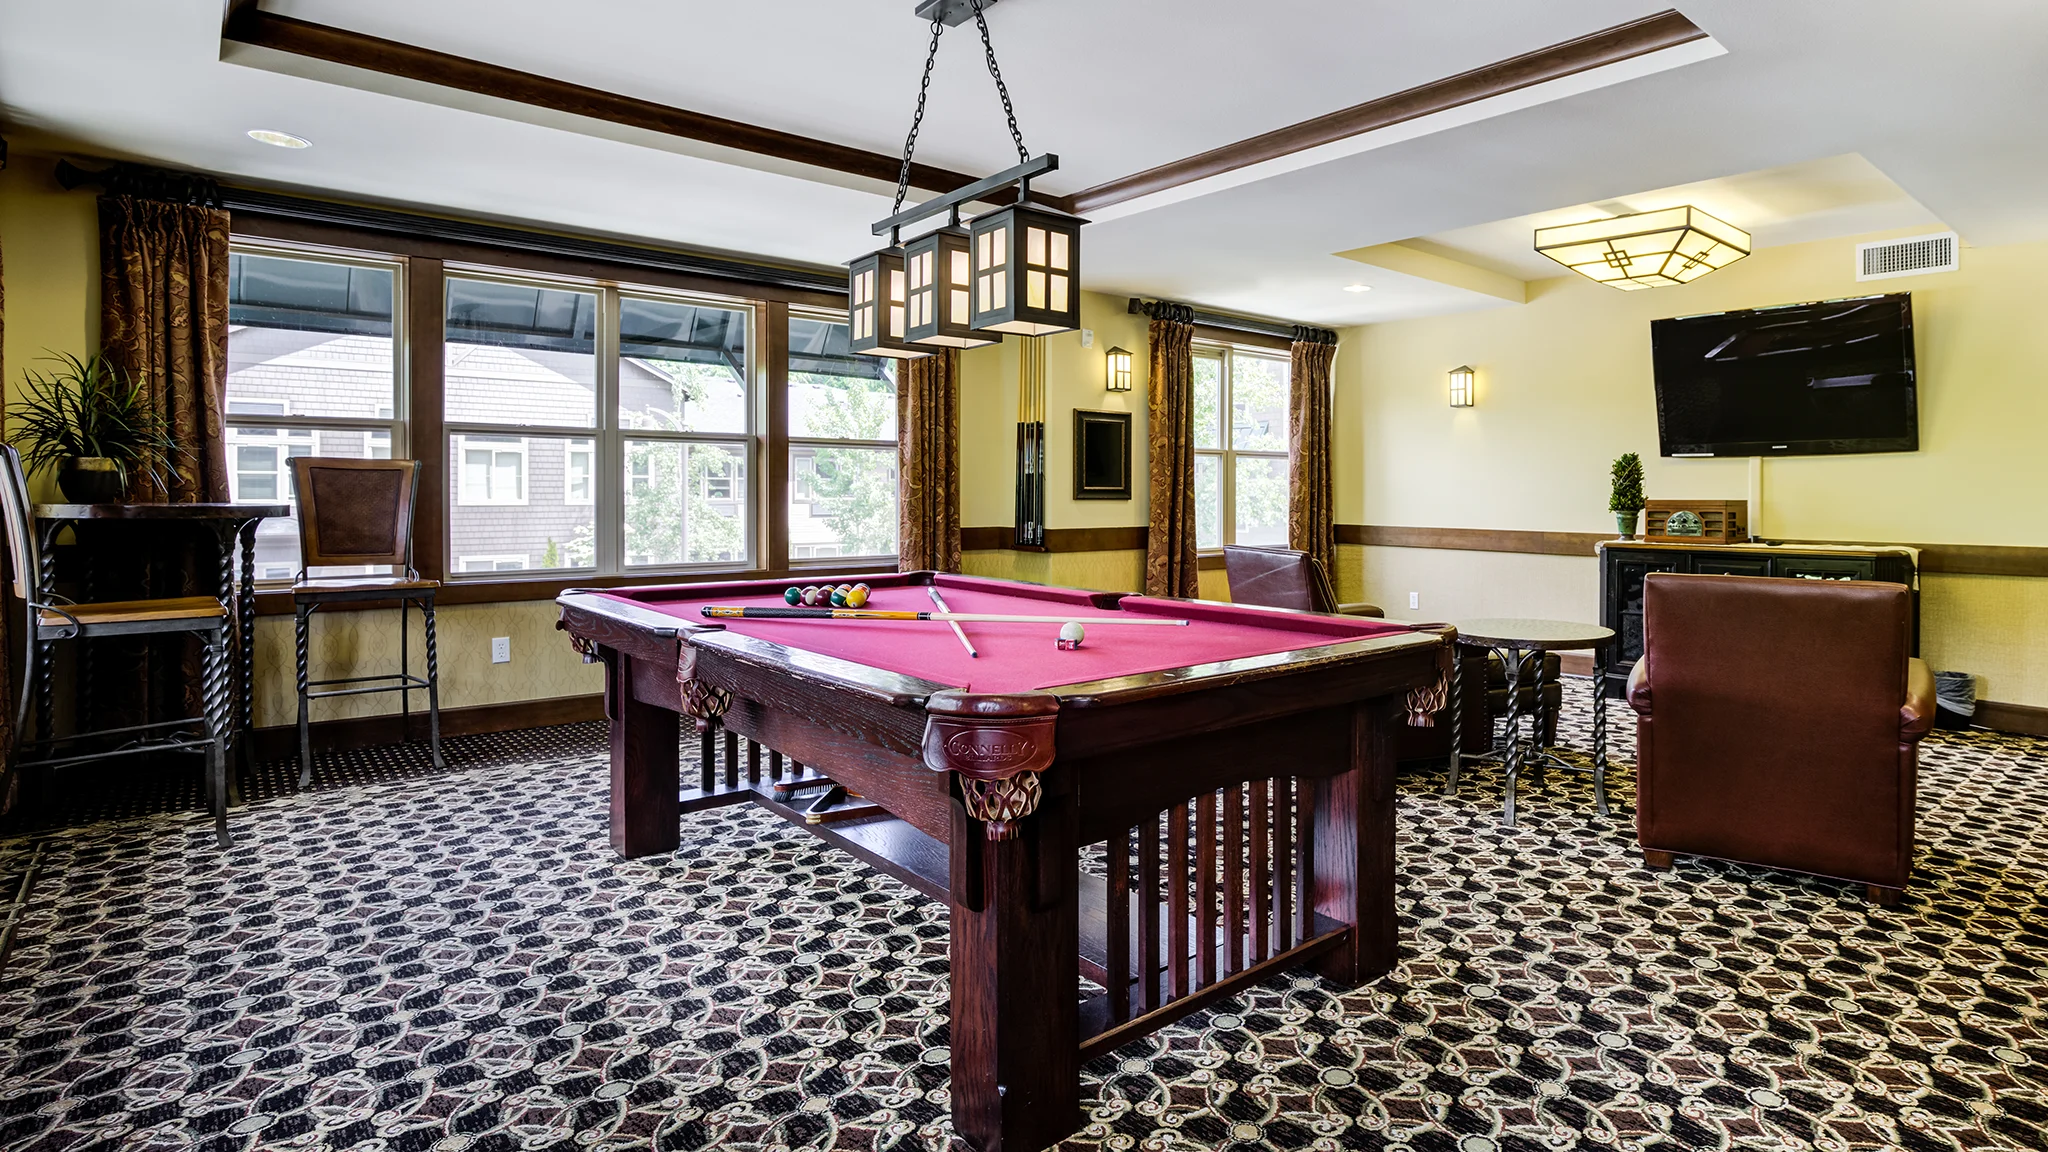 A pool table in the center of a room with a carpeted floor